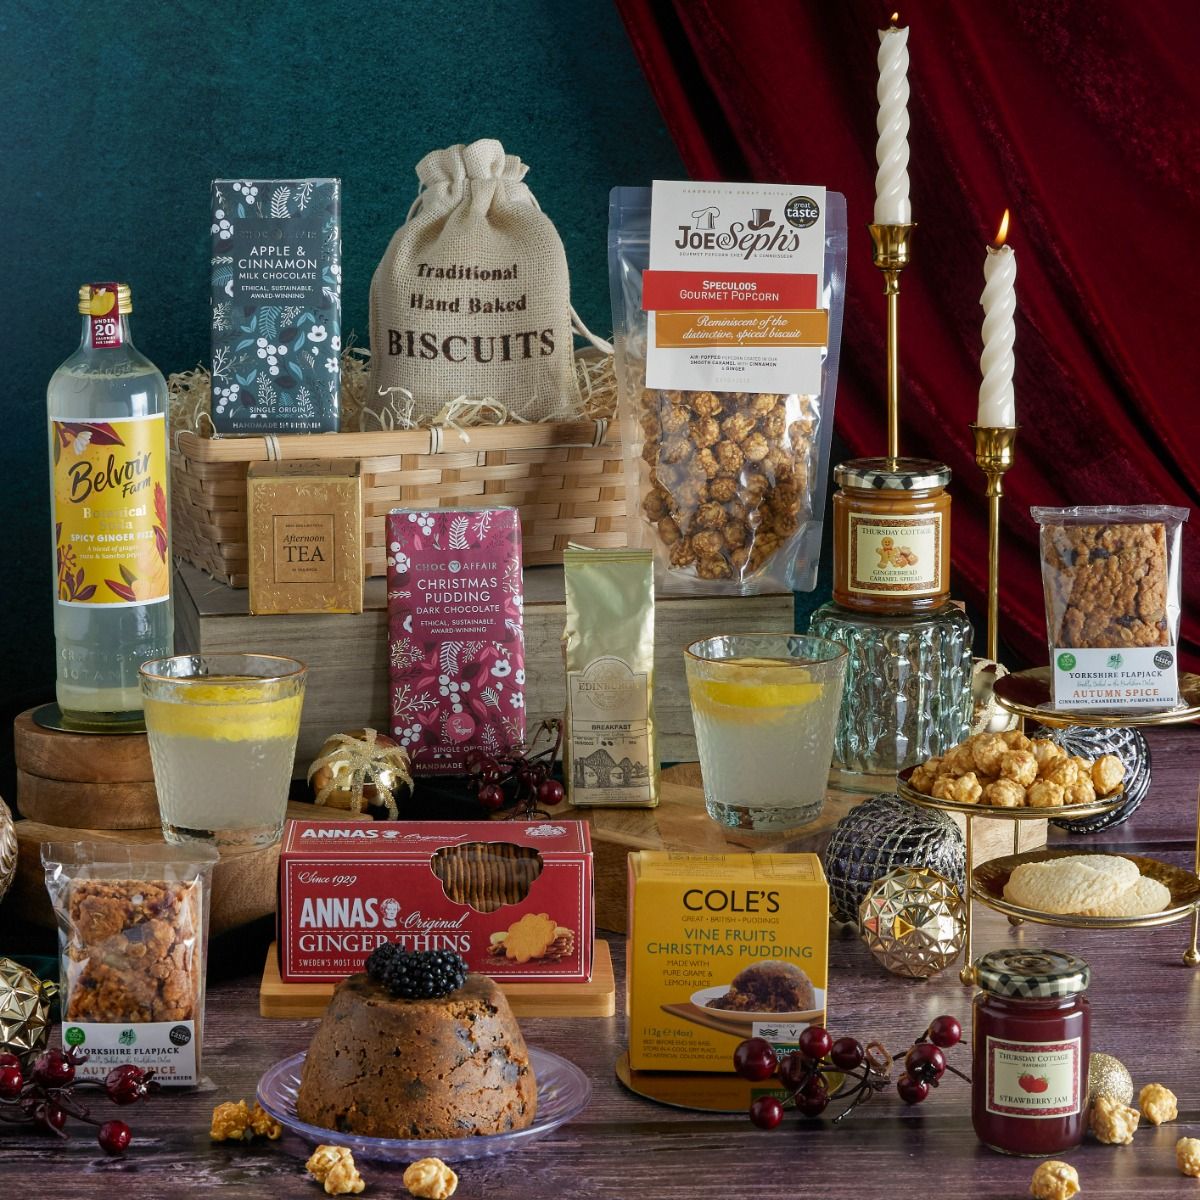 The Luxury Joy of Christmas Hampers with contents on display